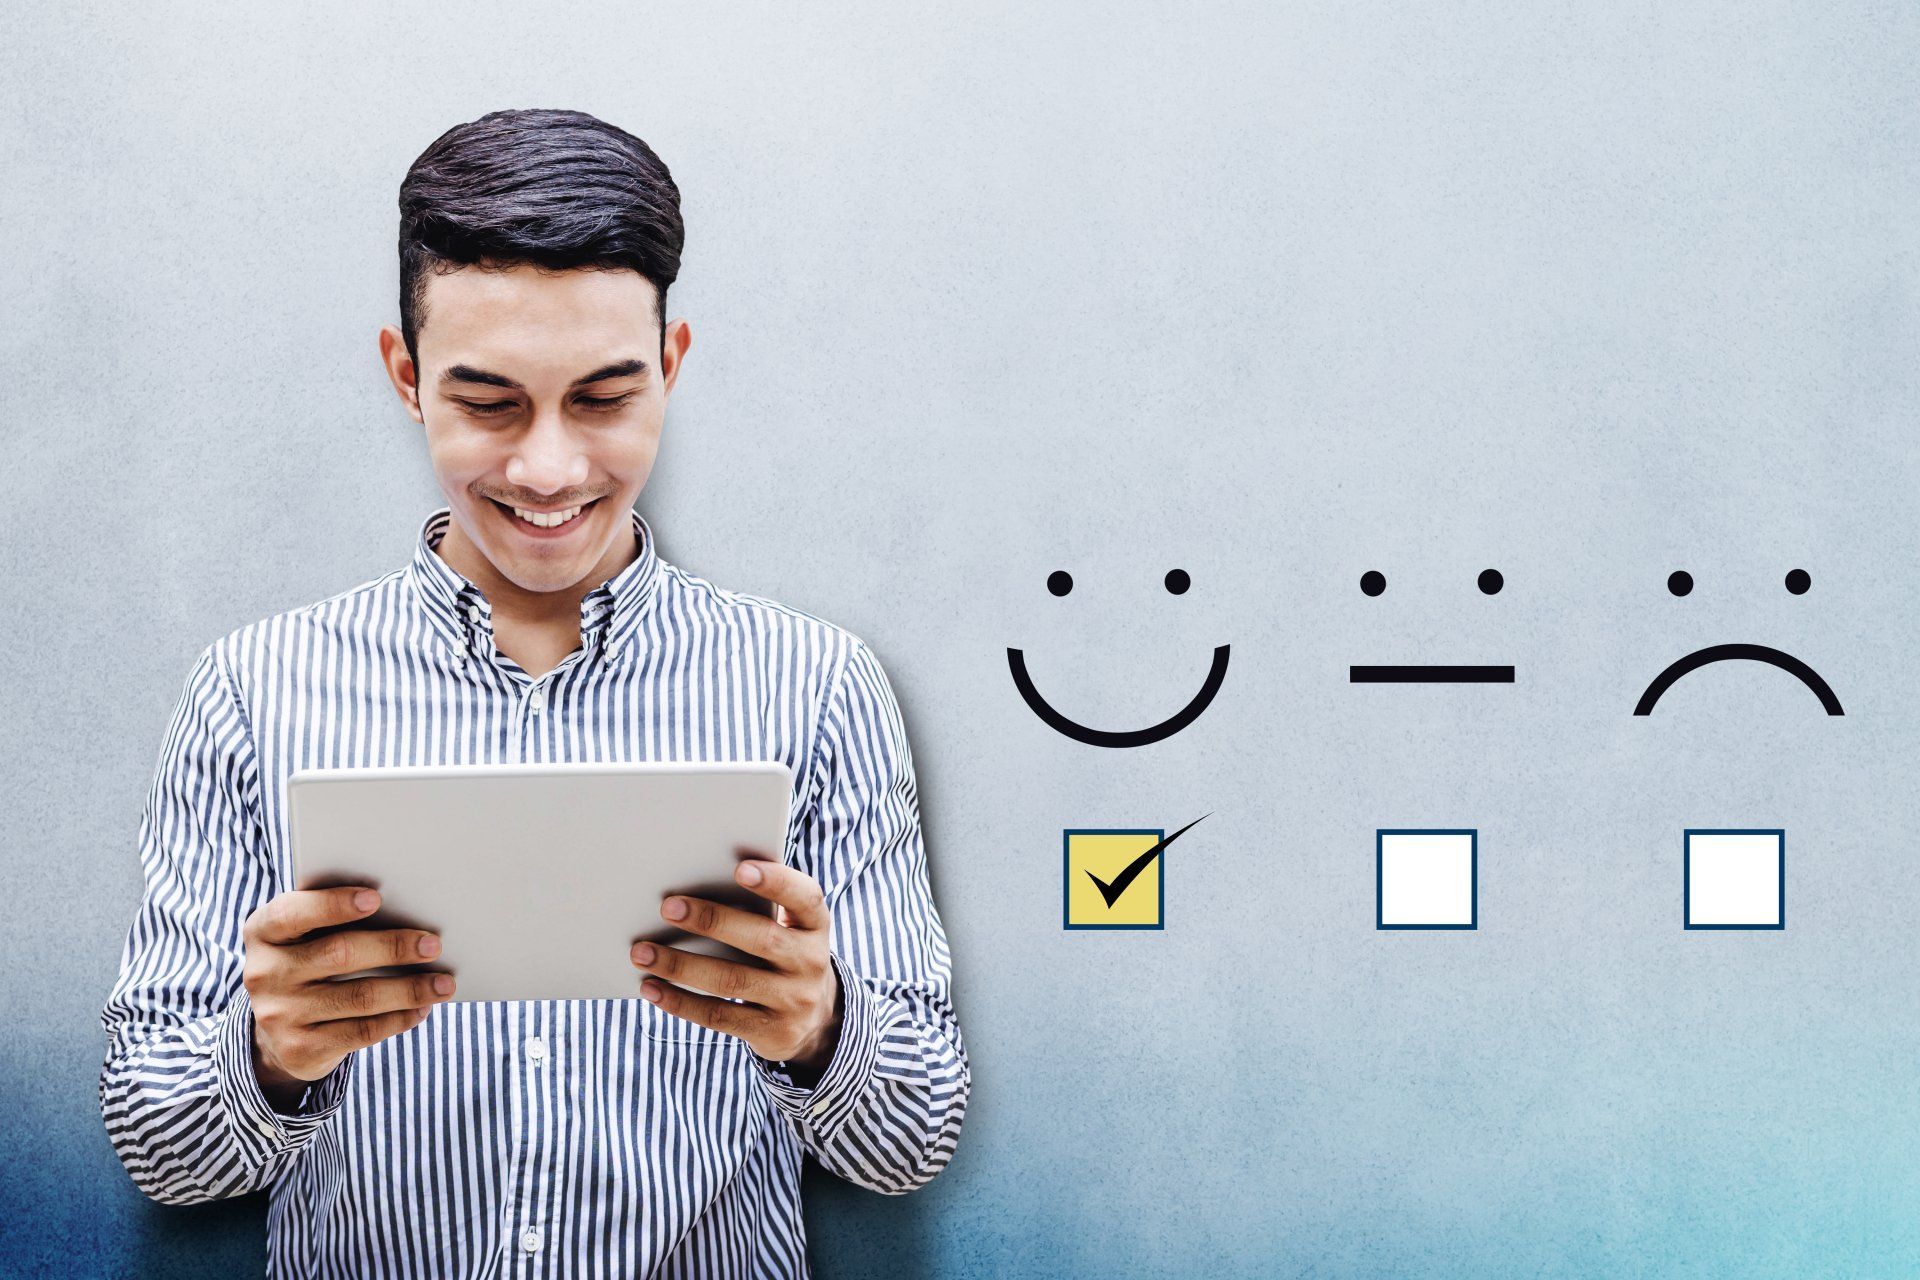 a man is holding a tablet in front of a wall with smiley faces on it .